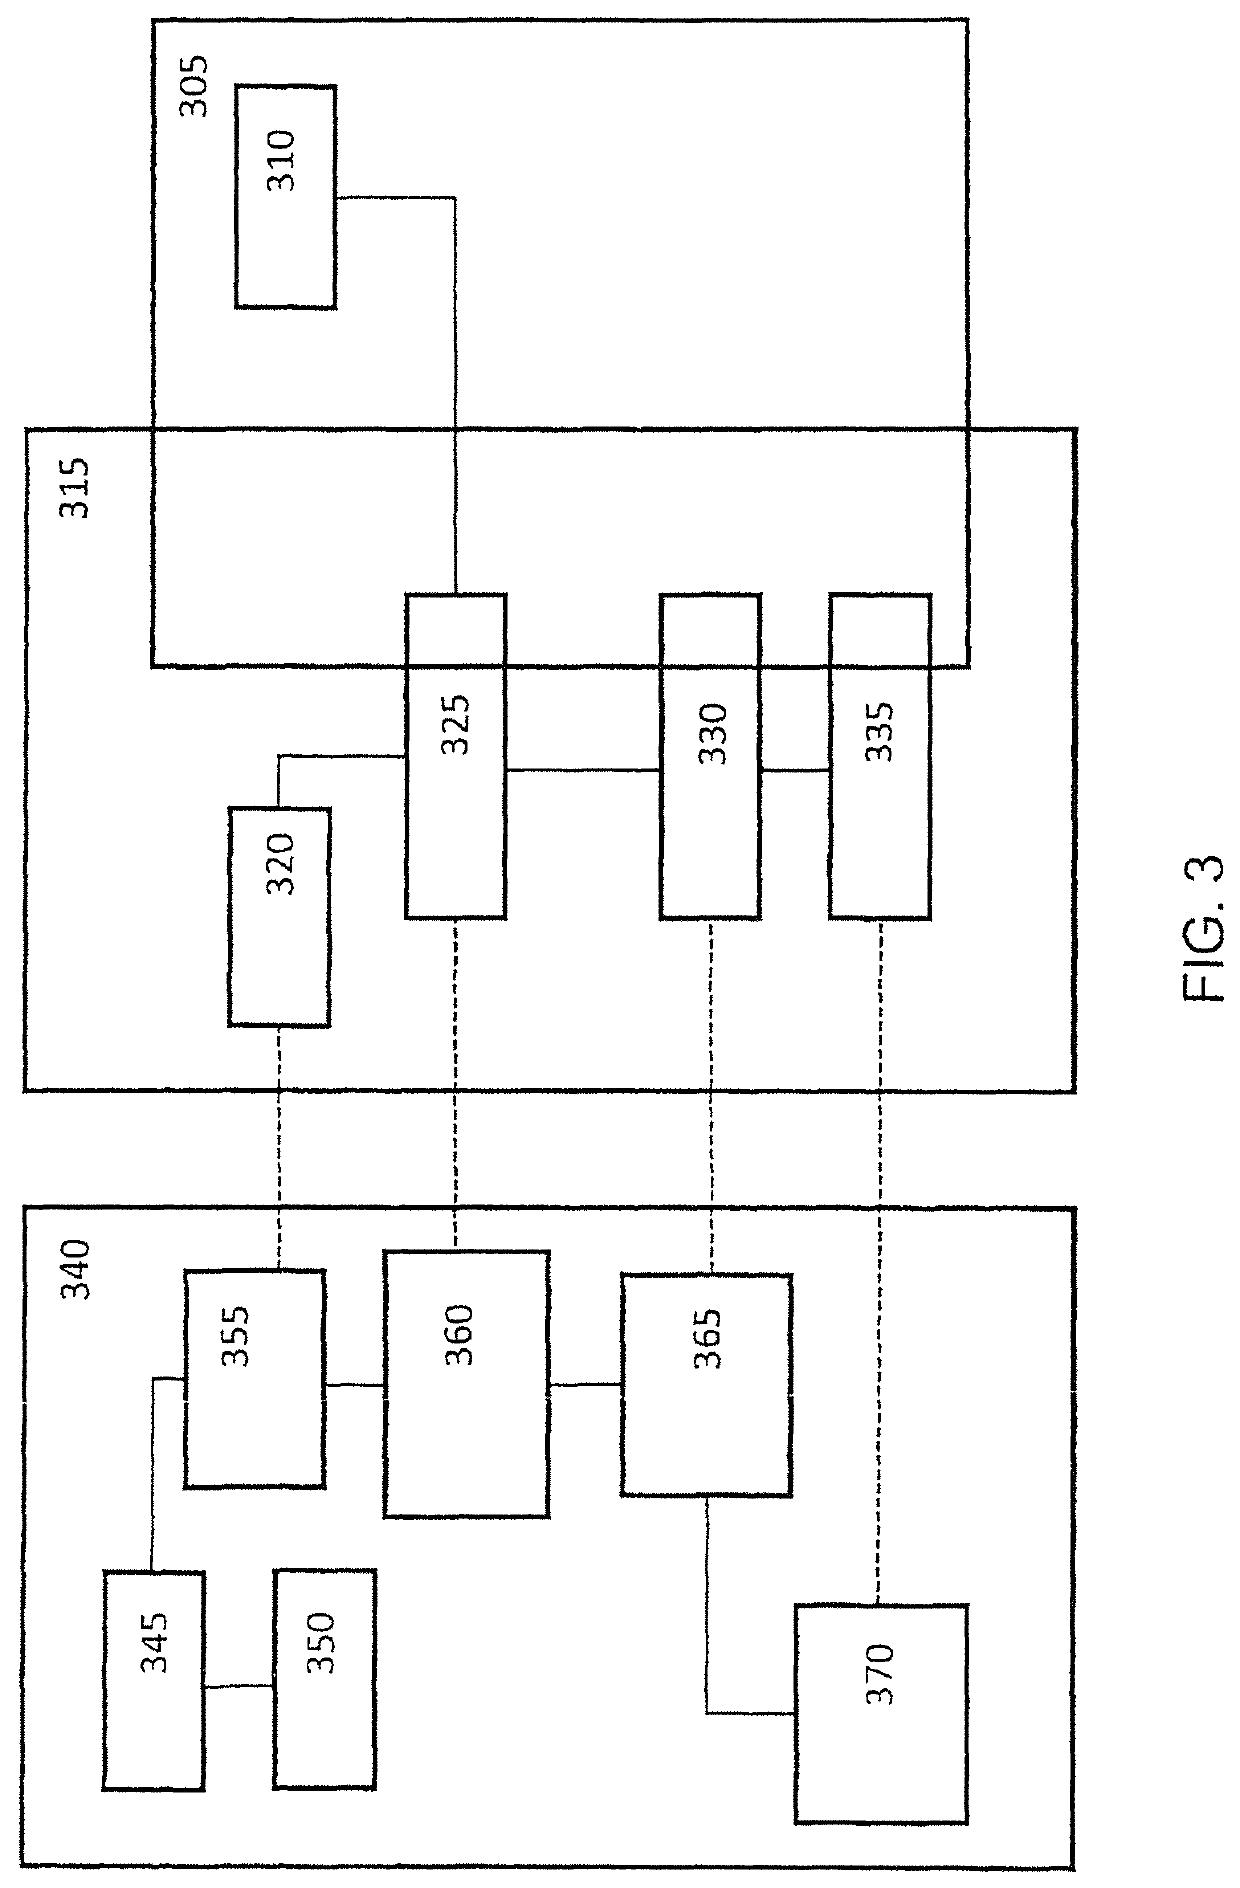 System, method, computer program product and user interface for controlling, detecting, regulating and/or analyzing biological, biochemical, chemical and/or physical processes